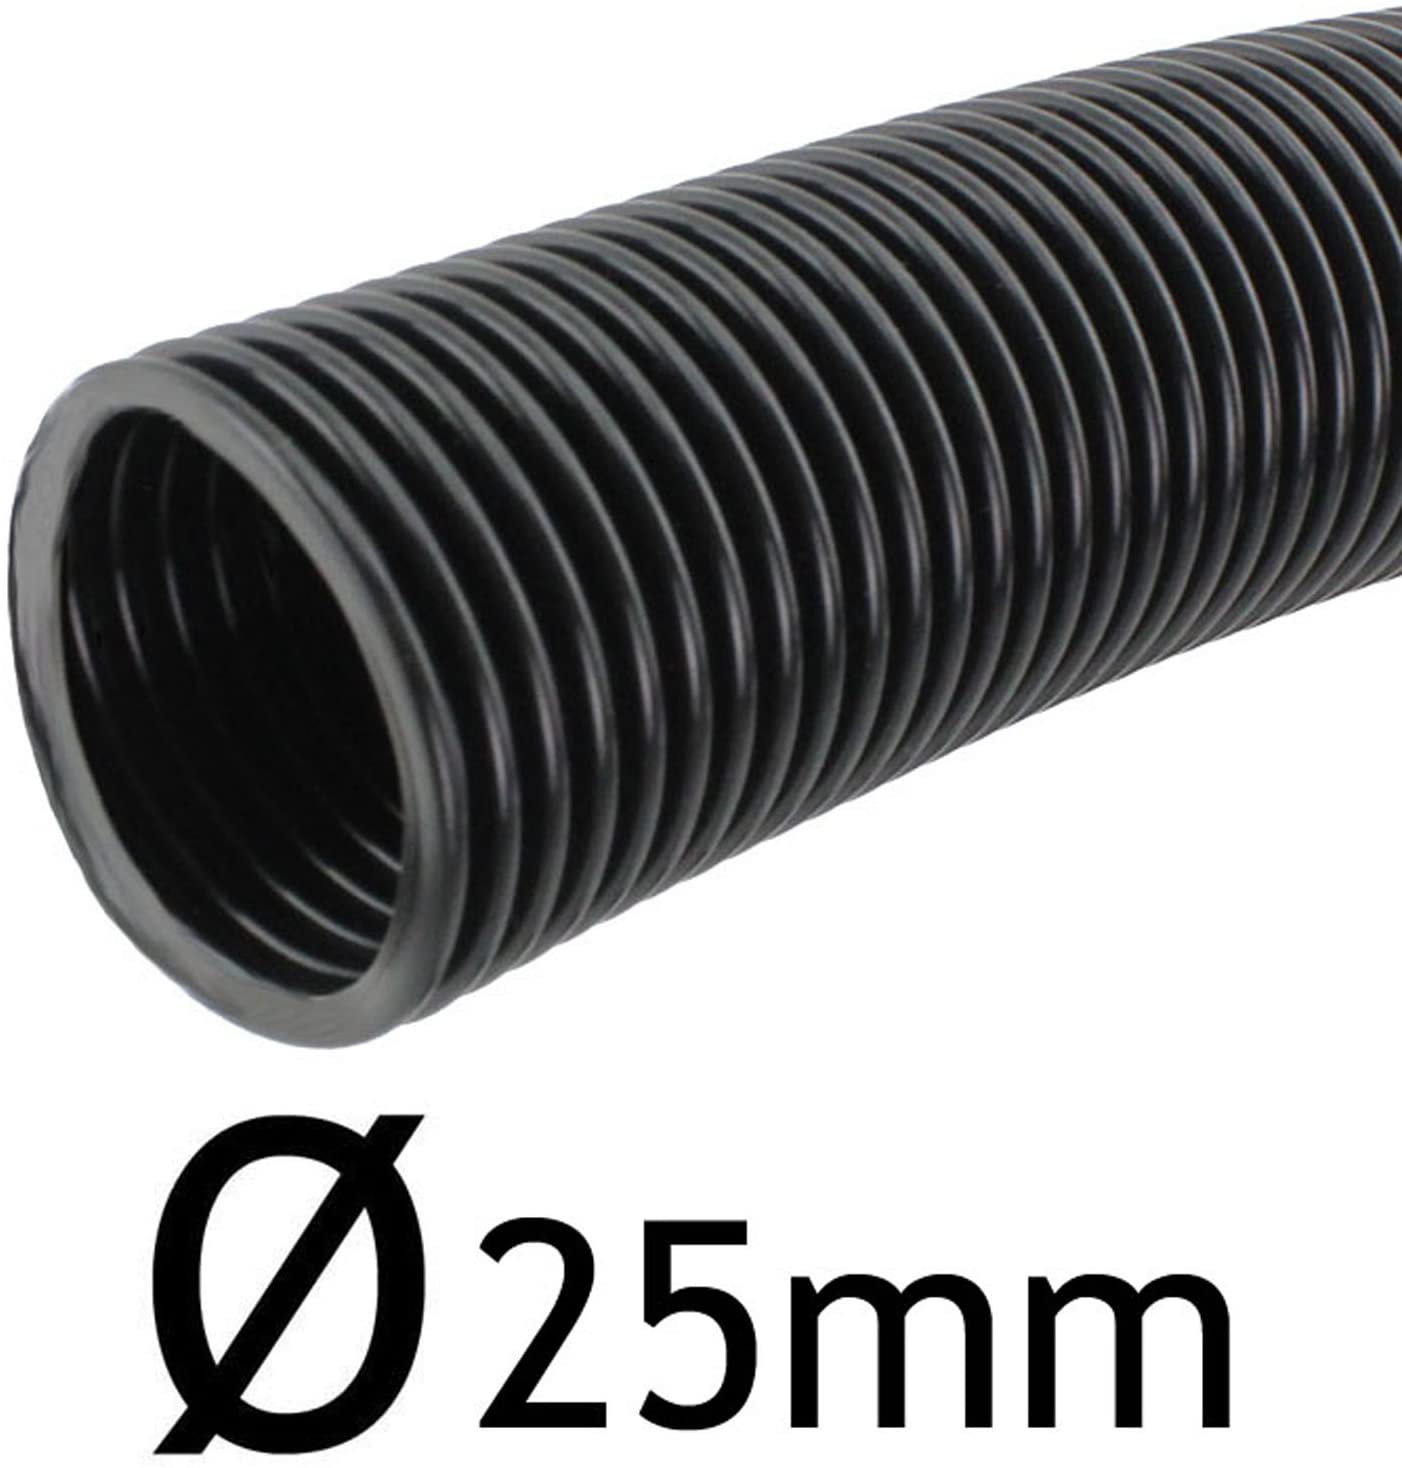 Universal Flexible Corrugated Hose Pipe for Watering Drip Feed Irrigation Garden Greenhouse Feeding (25mm, 5m)